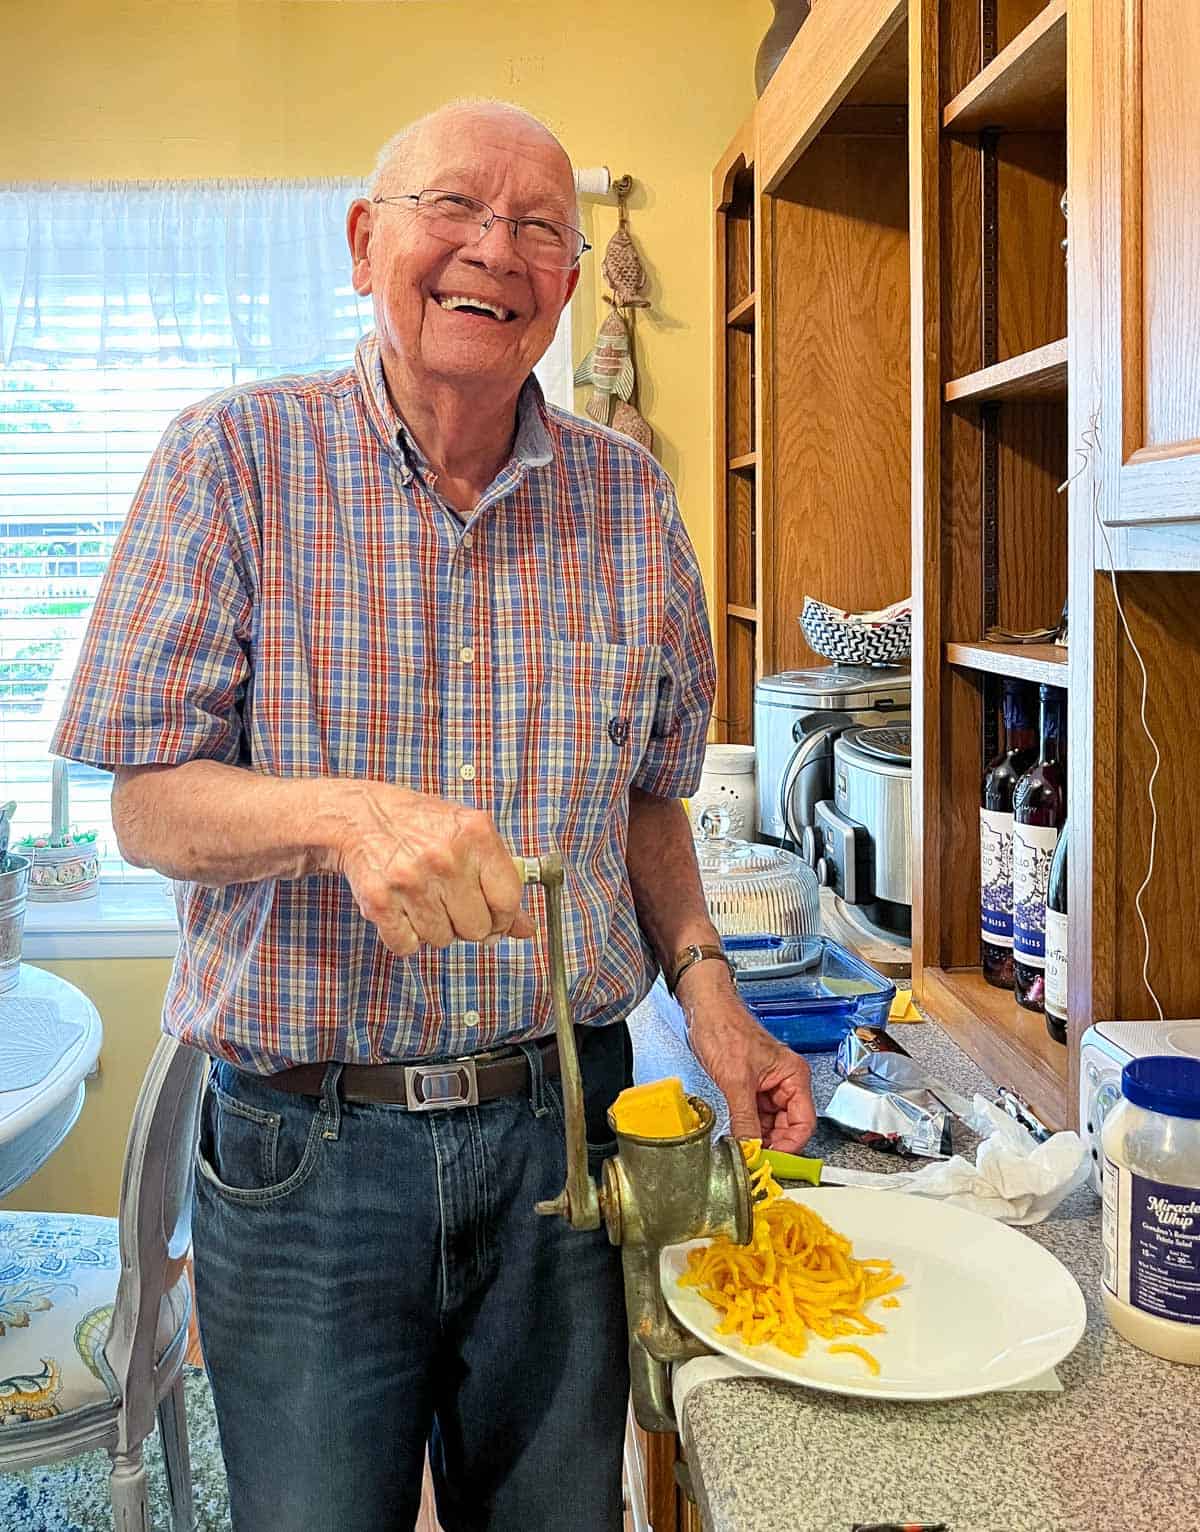 A man using a manual meat grinder to grind cheese for pimento cheese.